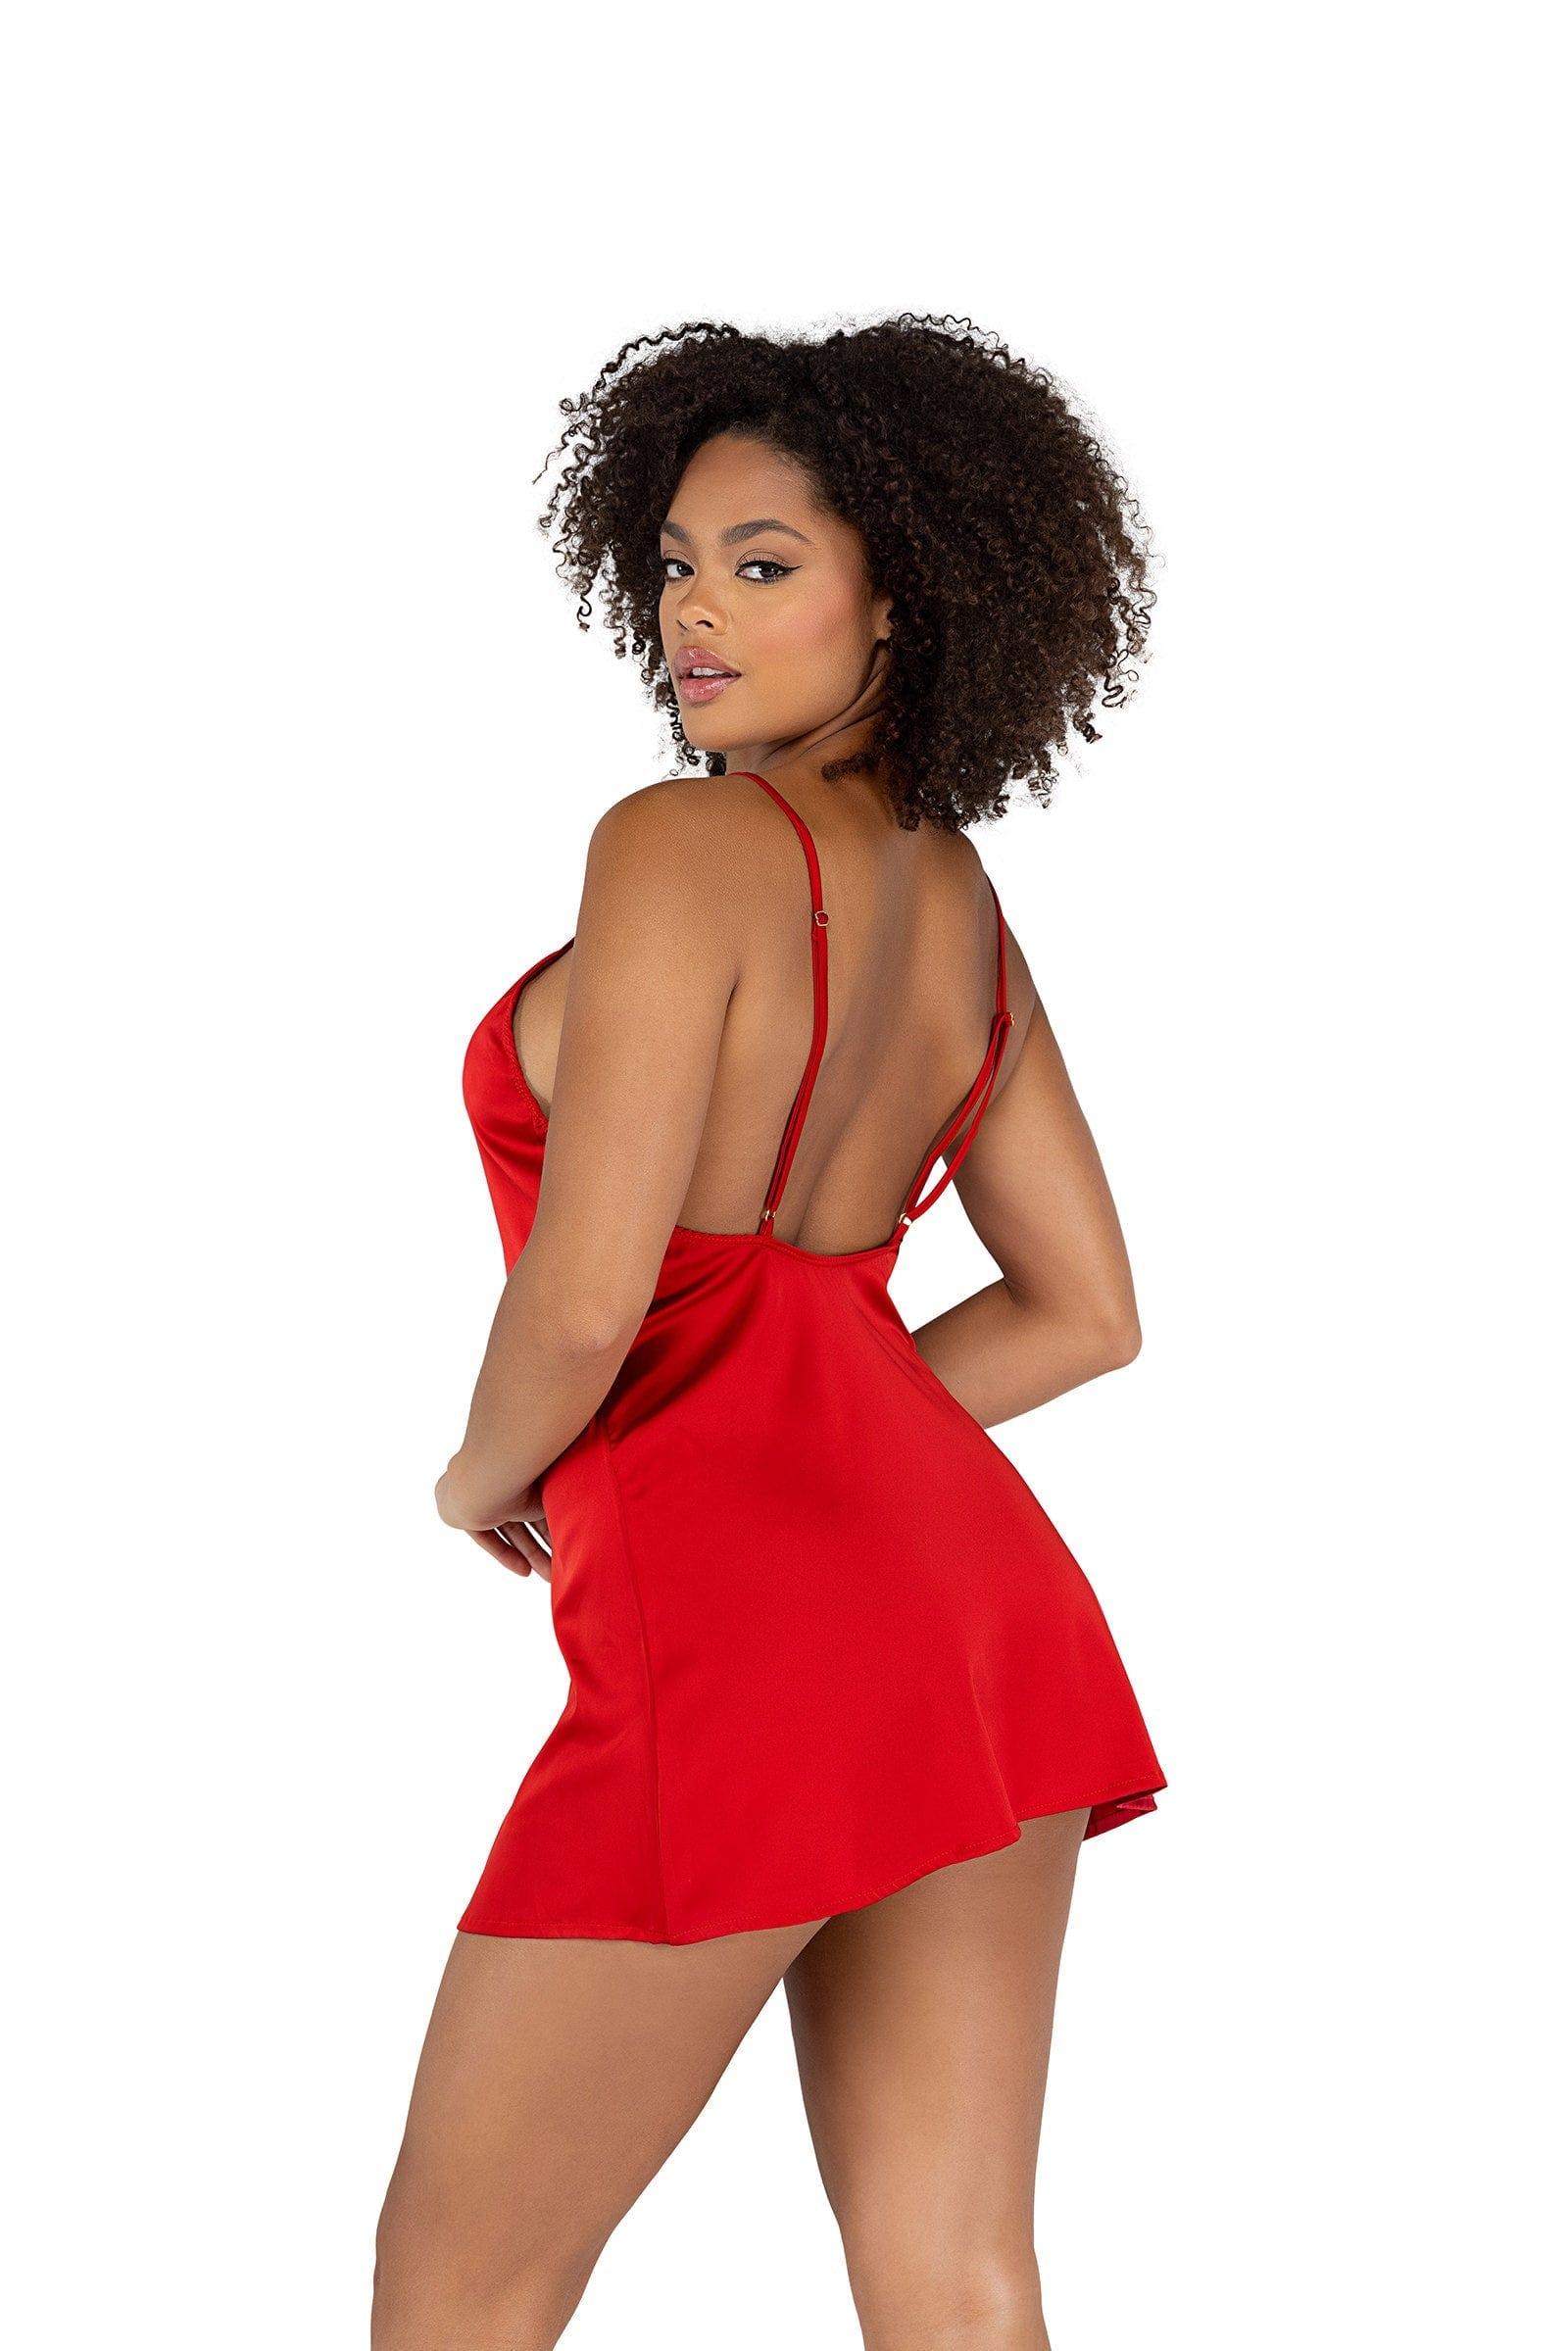 Roma Confidential Chemises Small / Red Soft Satin Chemise